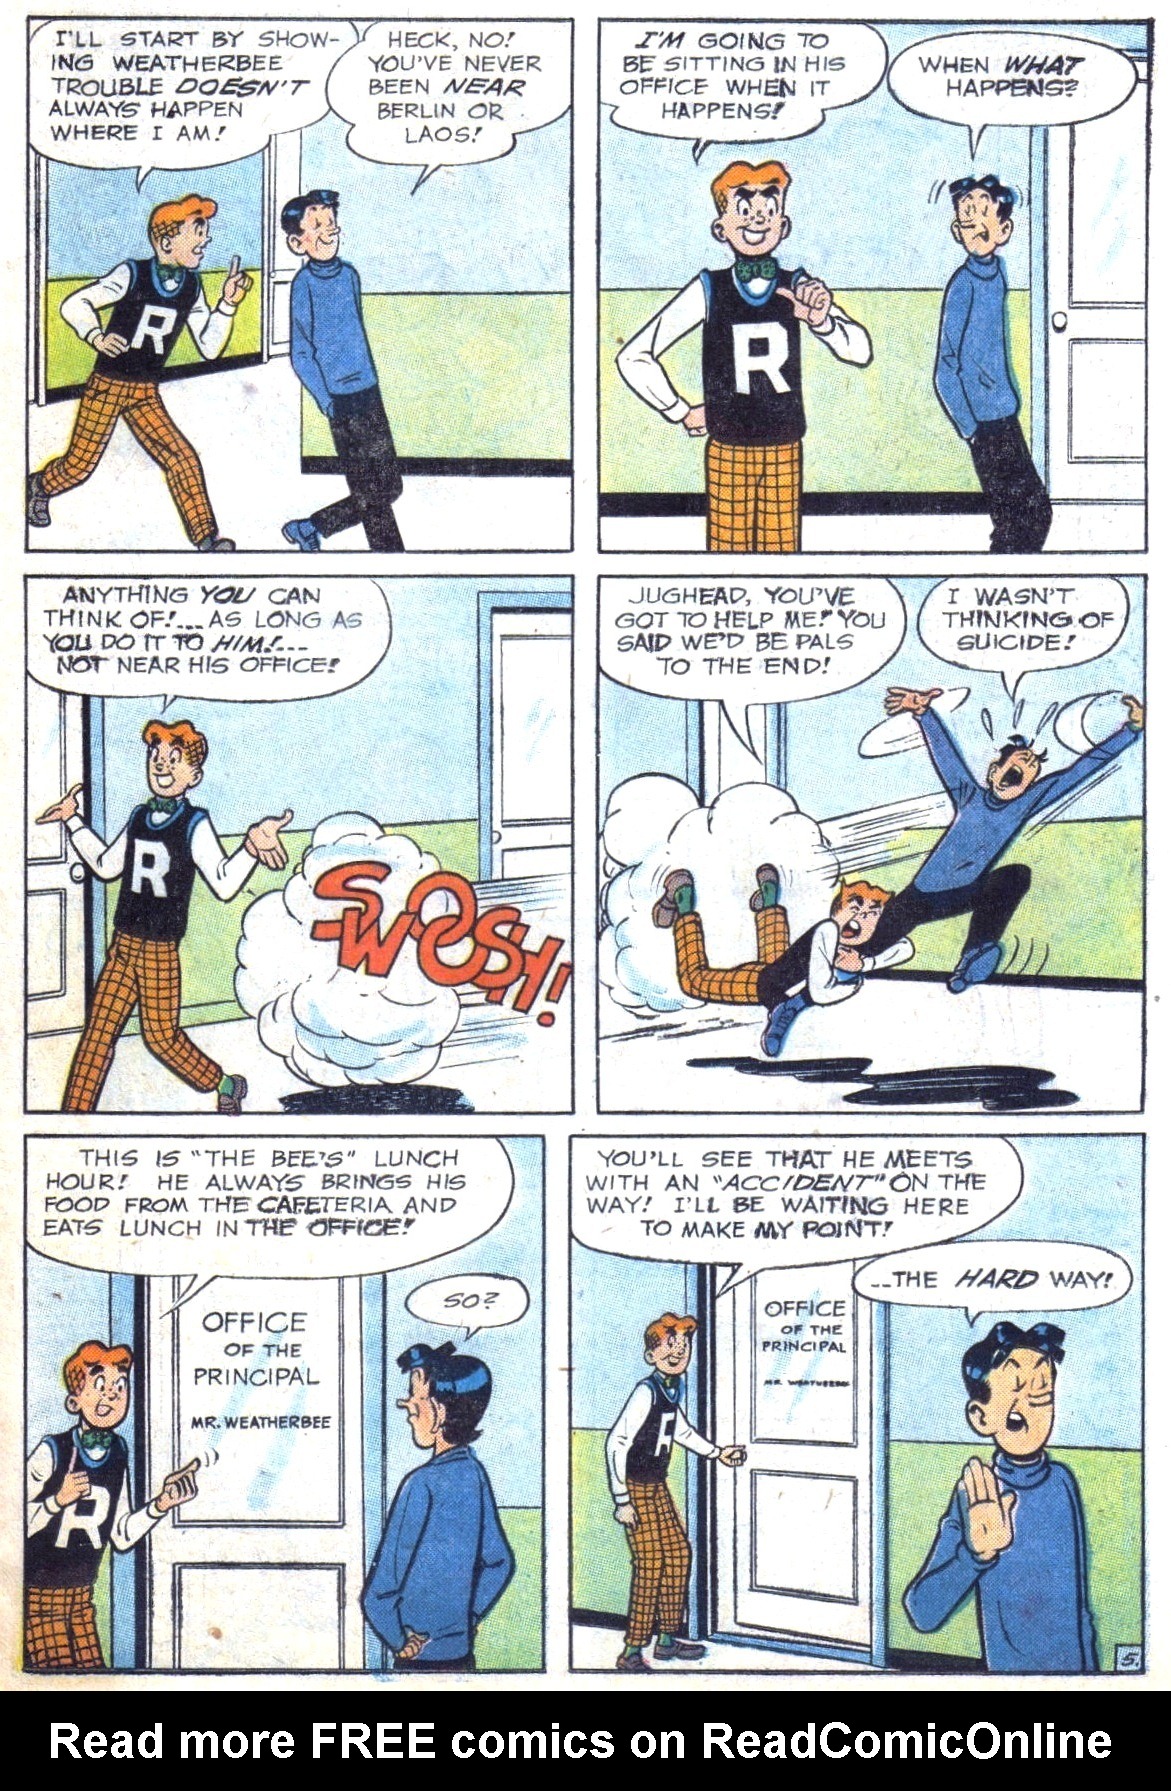 Archie (1960) 142 Page 7